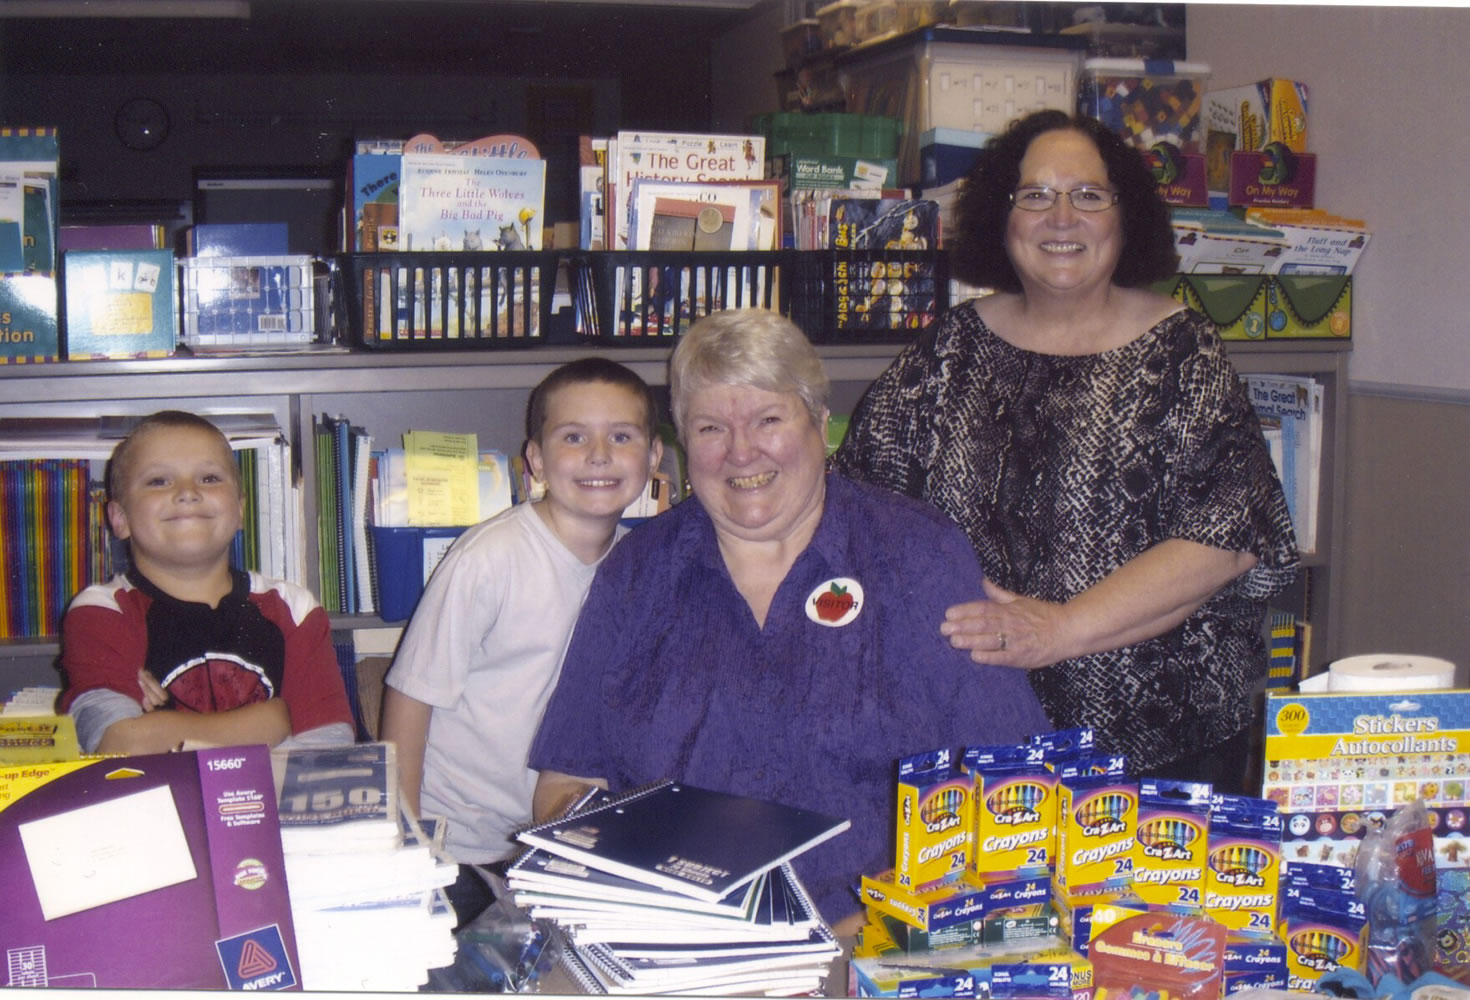 Hazel Dell: Oregon FL Club President Jody Morris (seated) is thanked by Hazel Dell Elementary School learning support teacher Marti Lloid and two of her students for donating a tableful of school supplies last month.